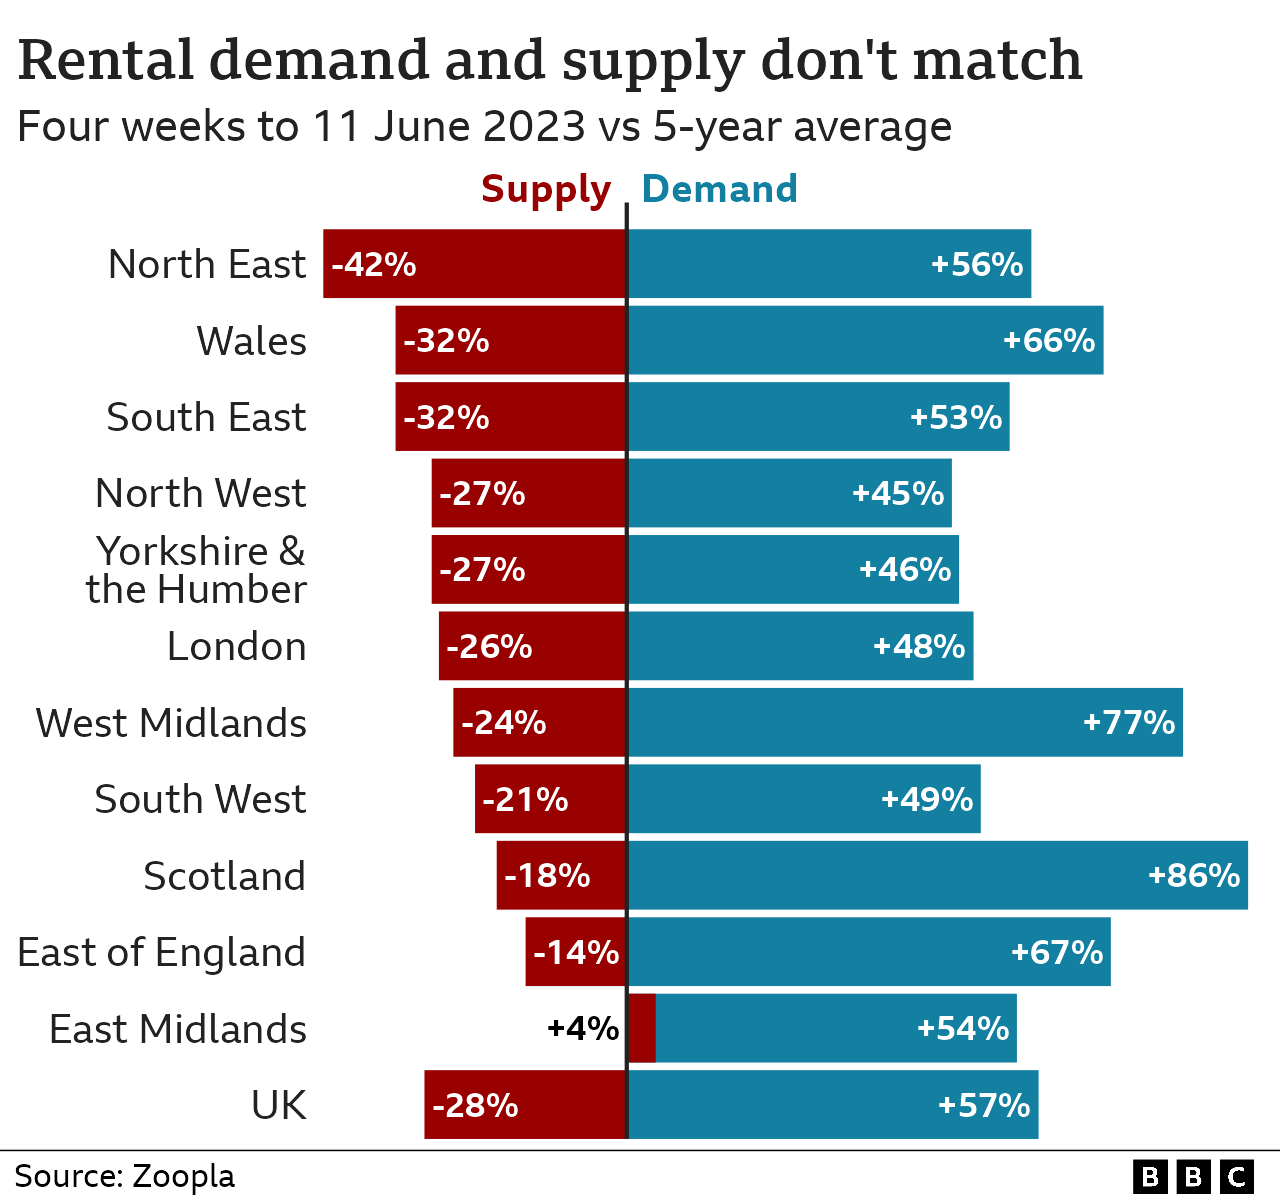 Bar chart showing the mismatch between rental supply and demand in different regions of the UK. Across the entire UK, demand was 57% higher in the four weeks to 11 June compared with the same period in the previous five years, while supply was 28% lower.